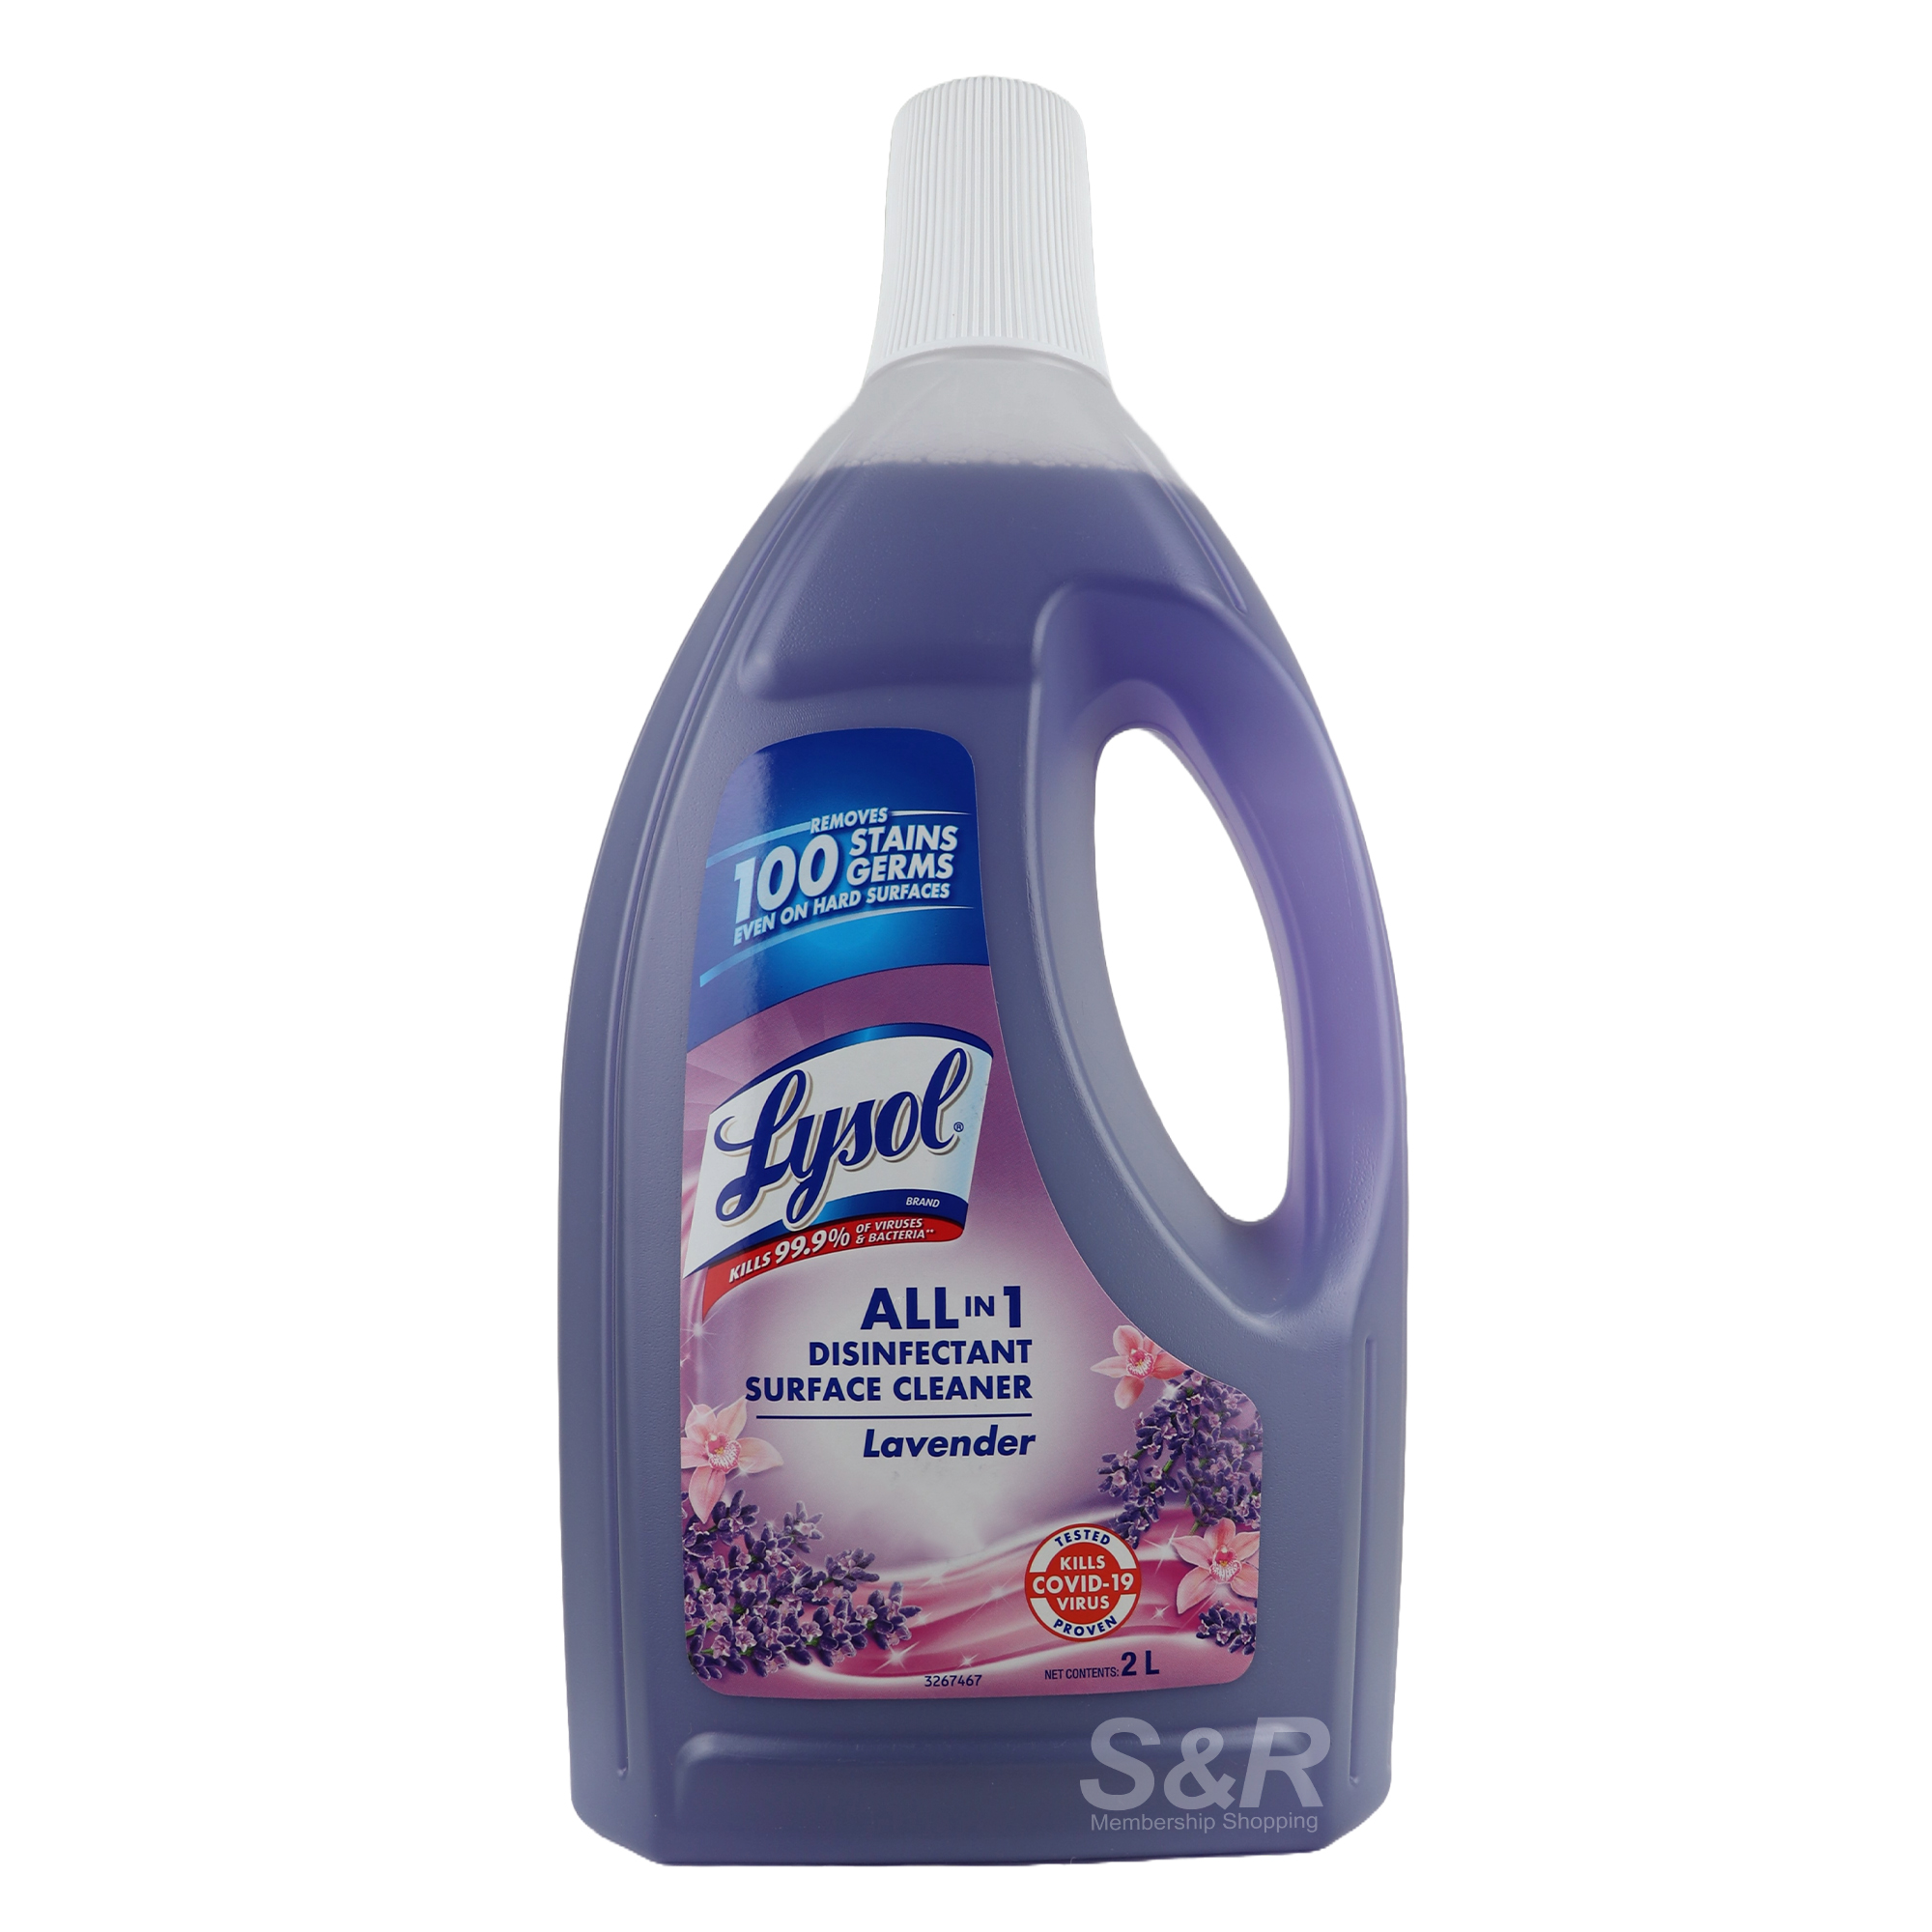 Lysol All in 1 Disinfectant Surface Cleaner Lavender 2L